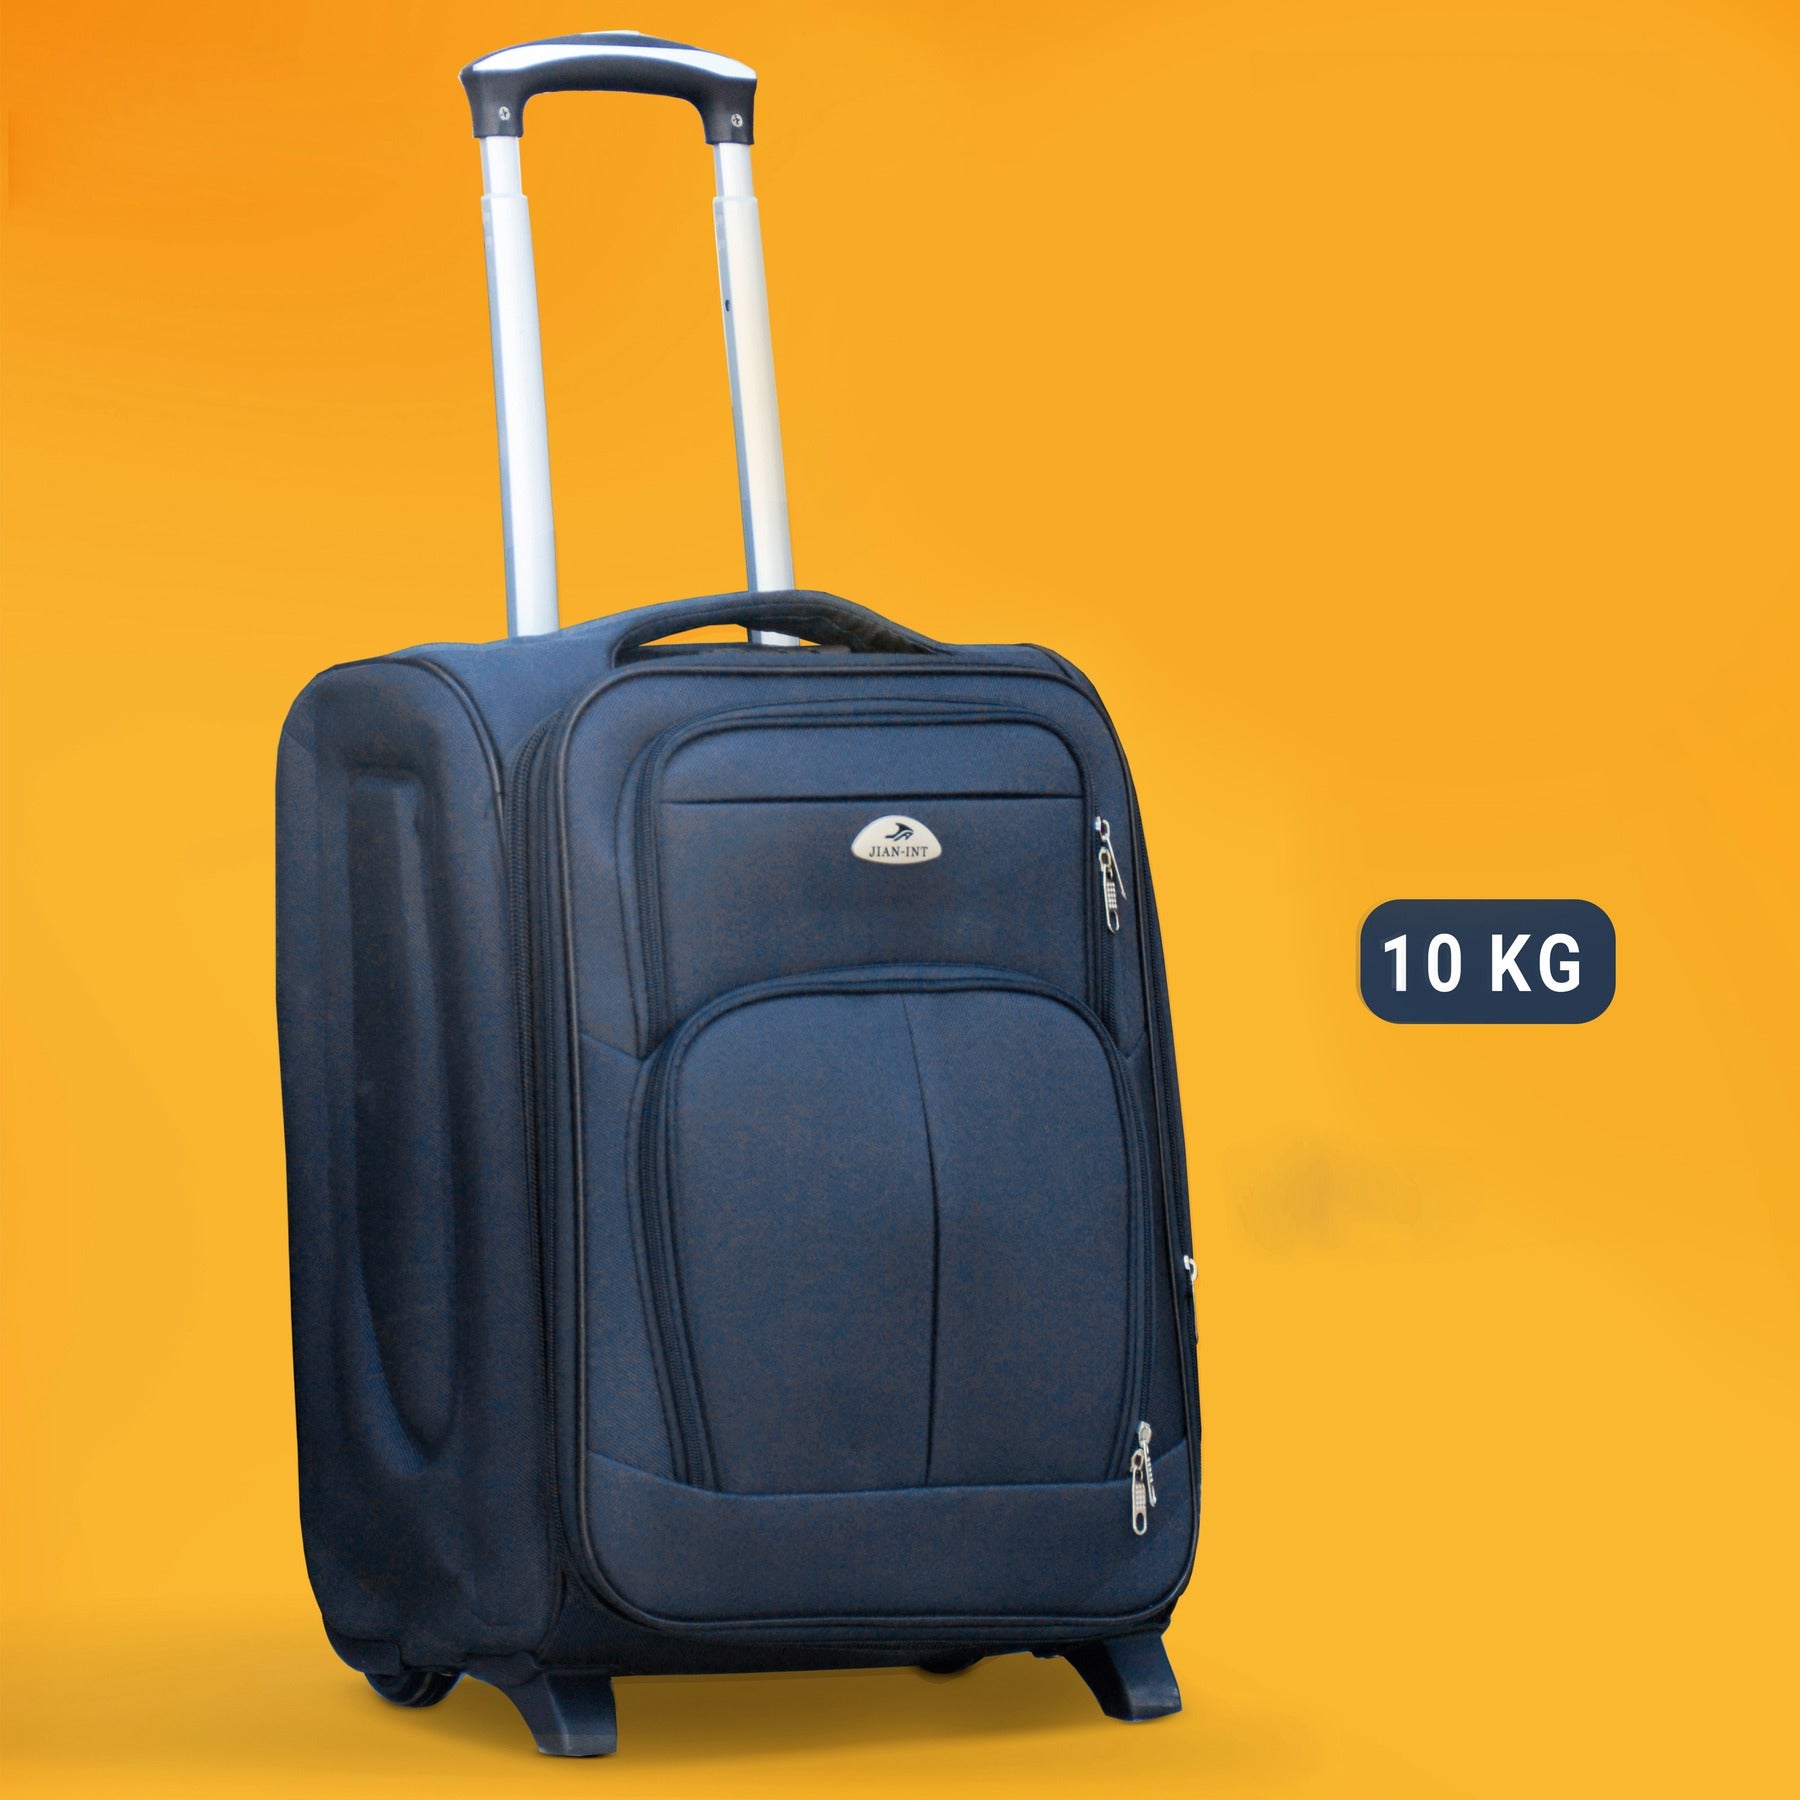 10 kg 2 Wheel Lightweight Soft Material luggage